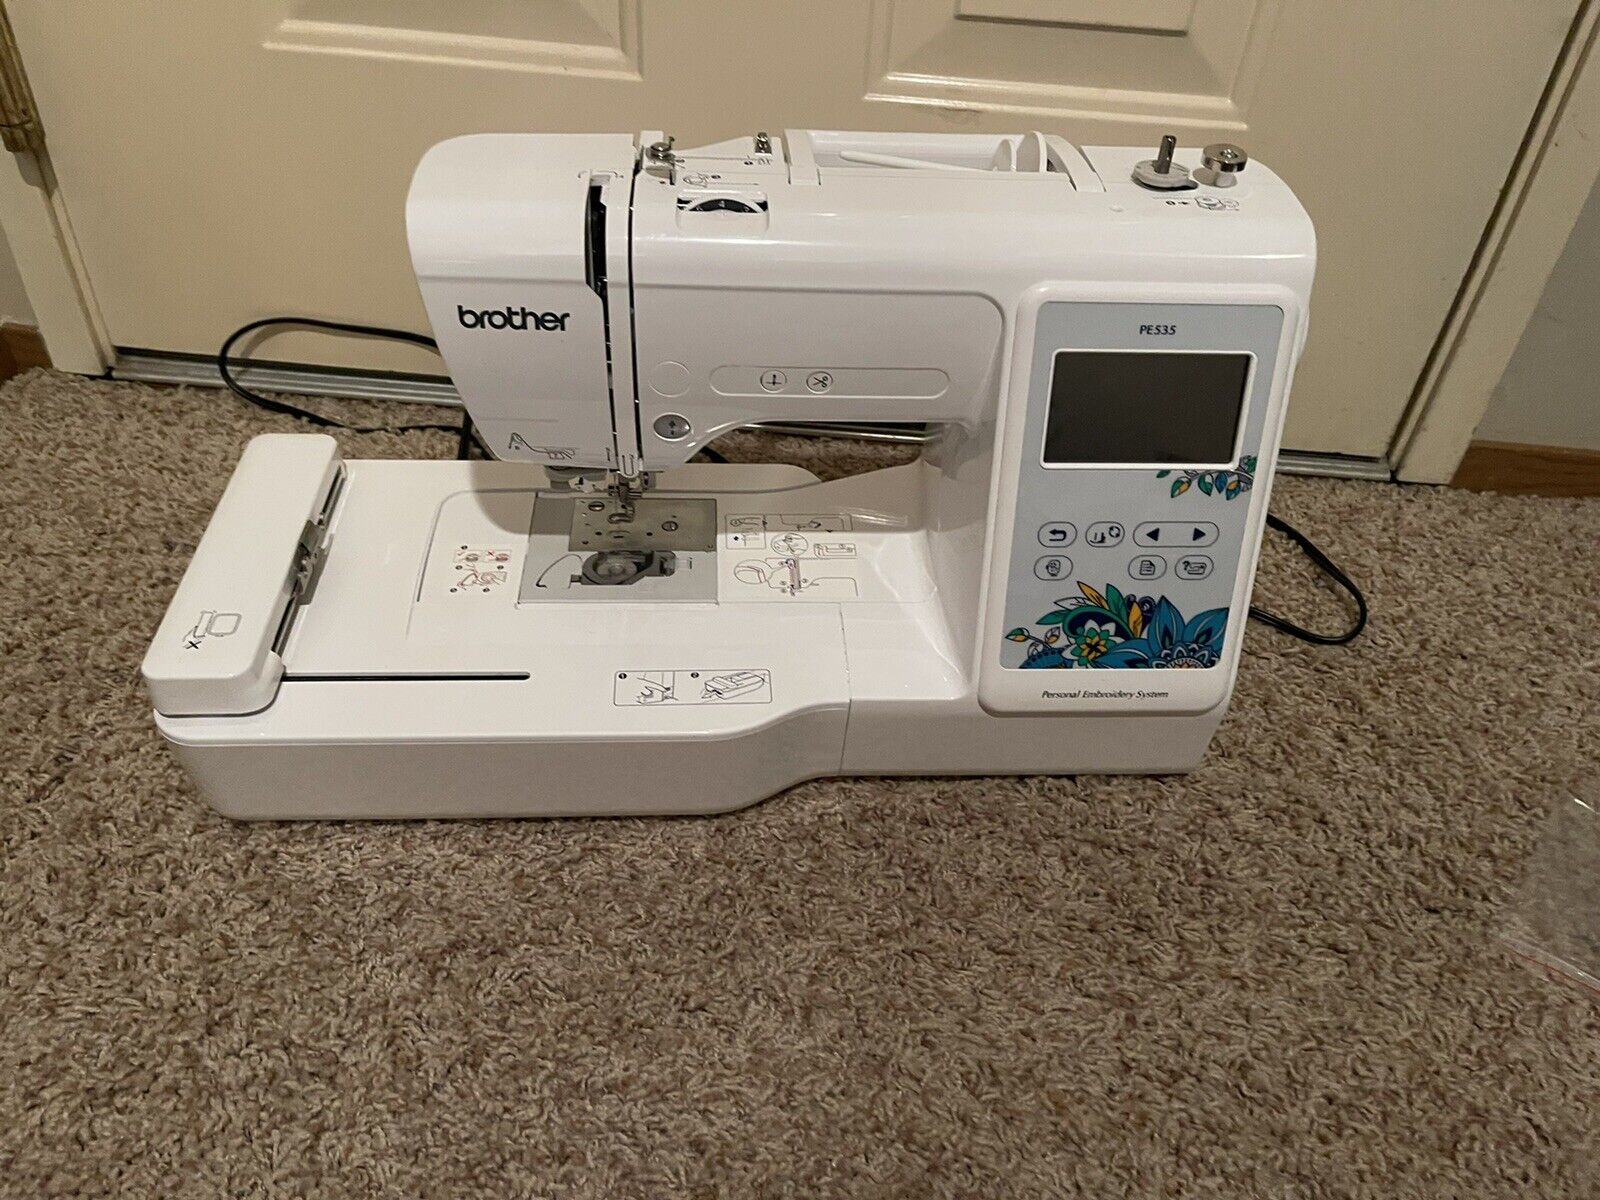 Brother 4x4 Embroidery Machine (PE535)